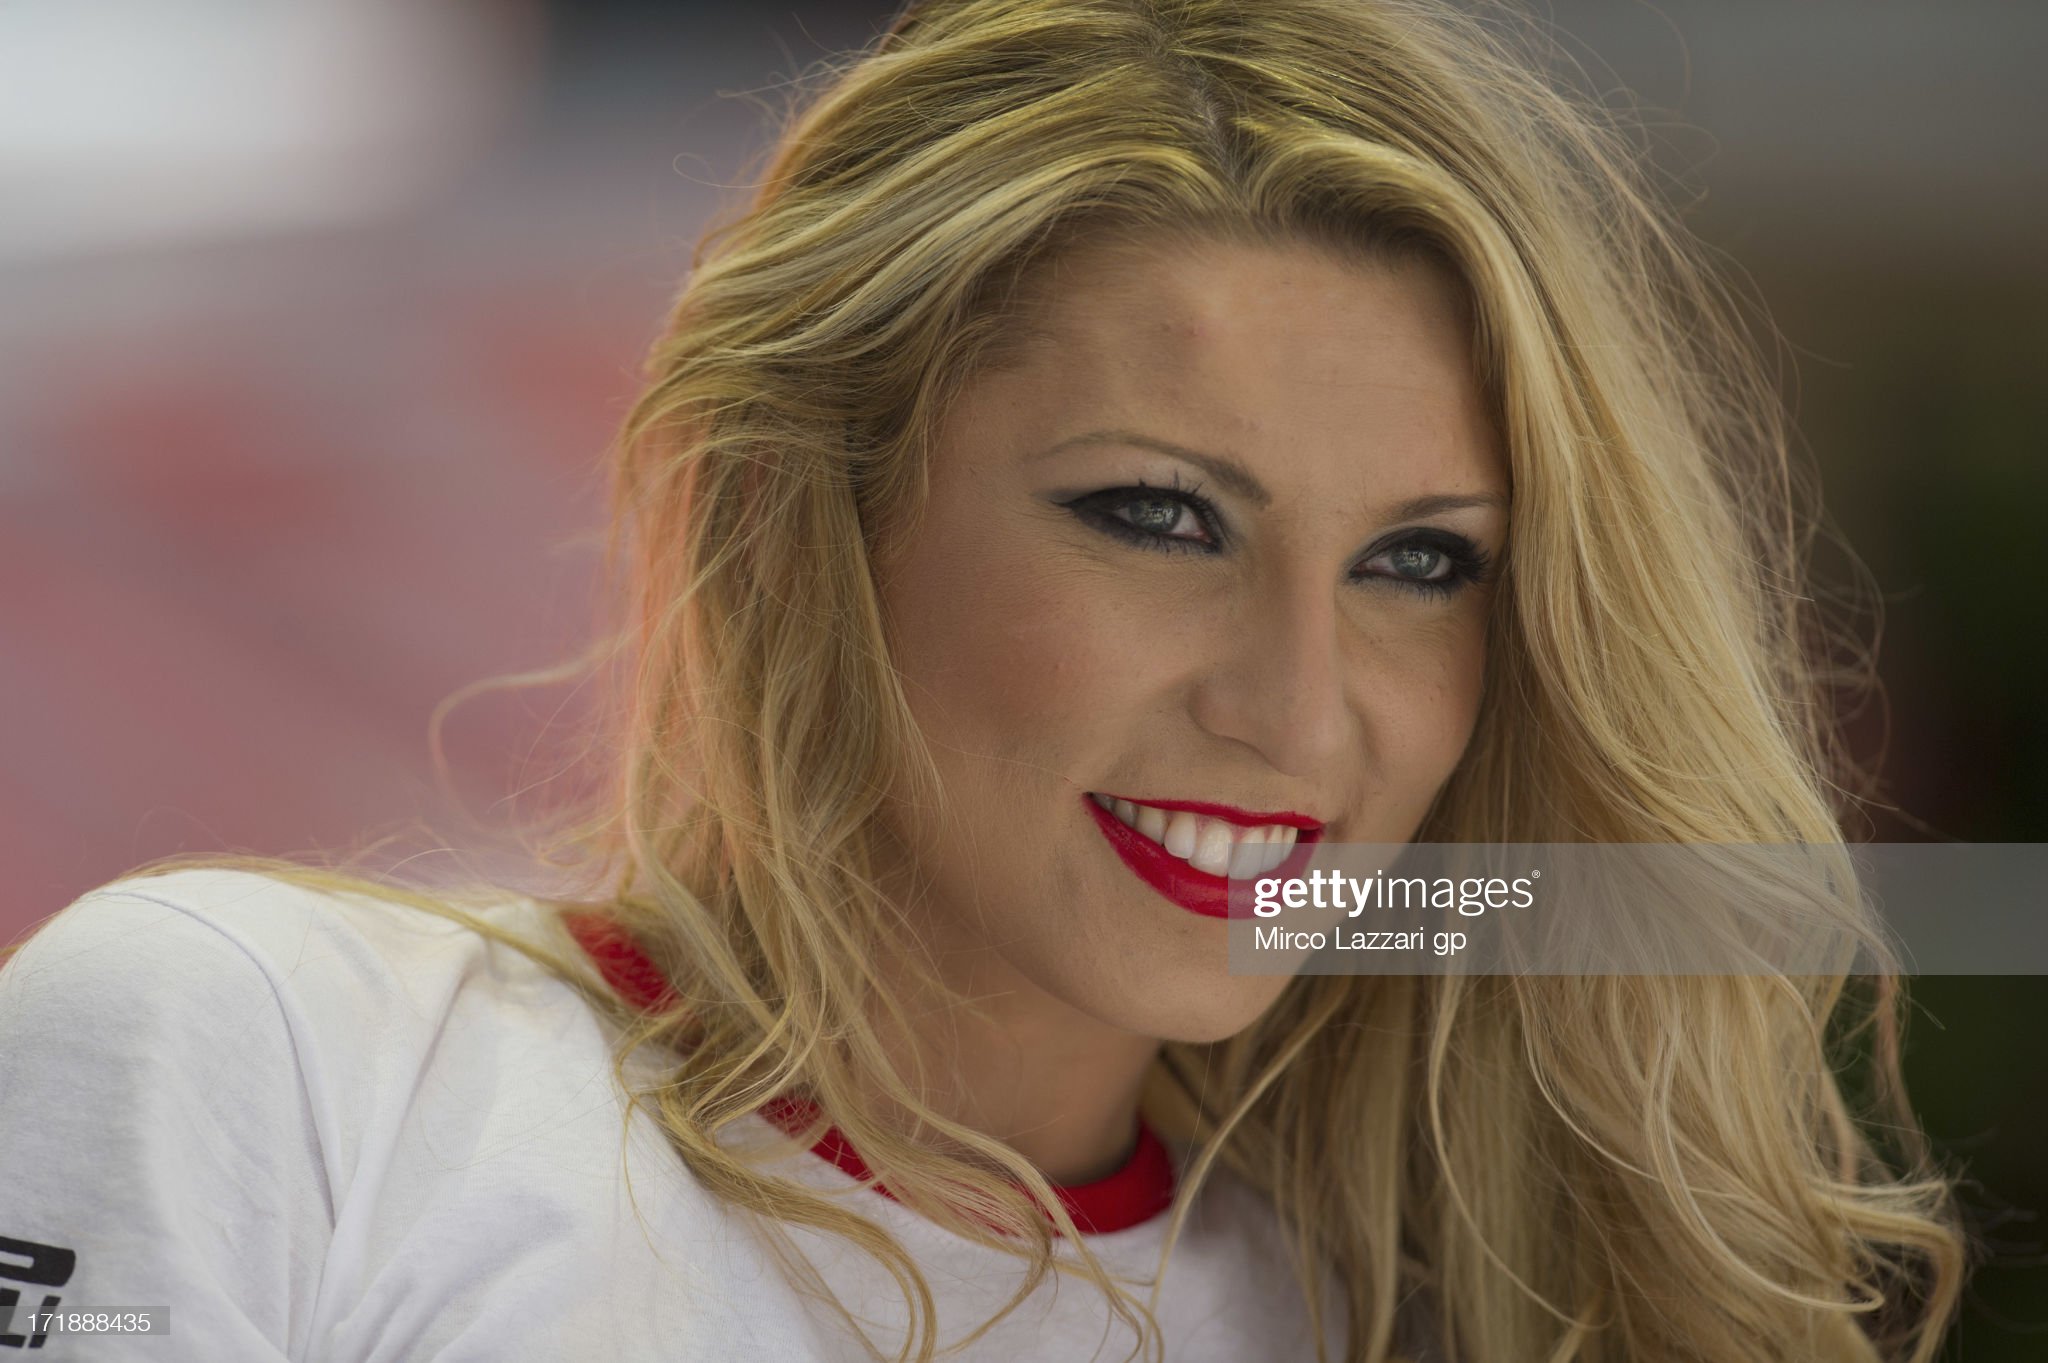 A grid girl poses during the round seven of 2013 Superbike FIM World Championship on June 29, 2013 in Imola, Italy.